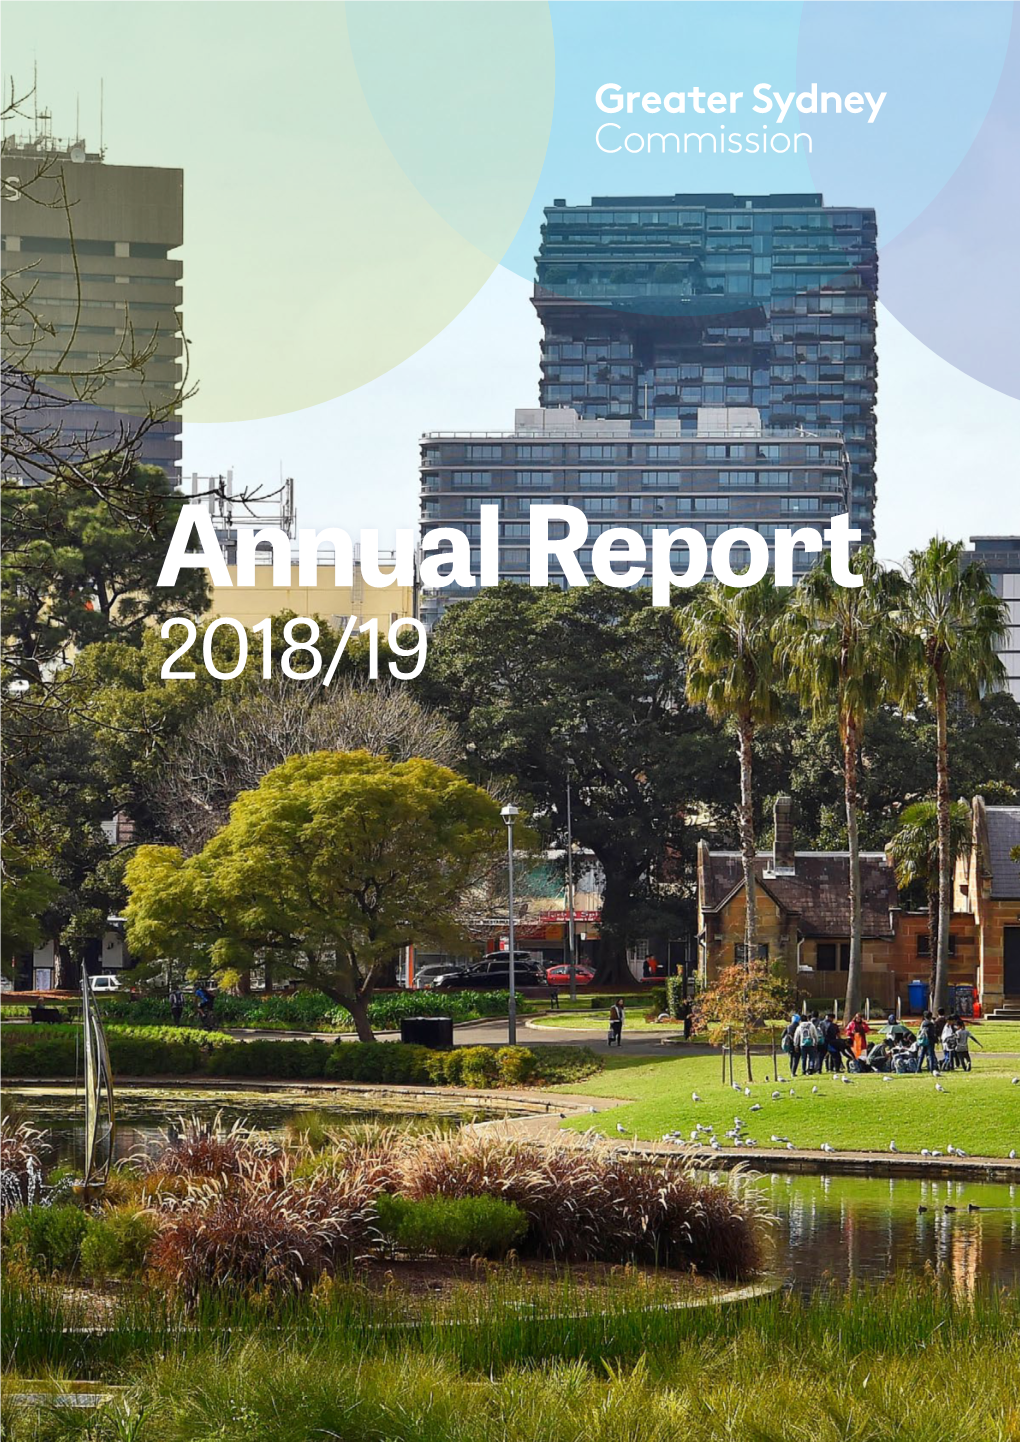 Greater Sydney Commission Annual Report 2018 / 19